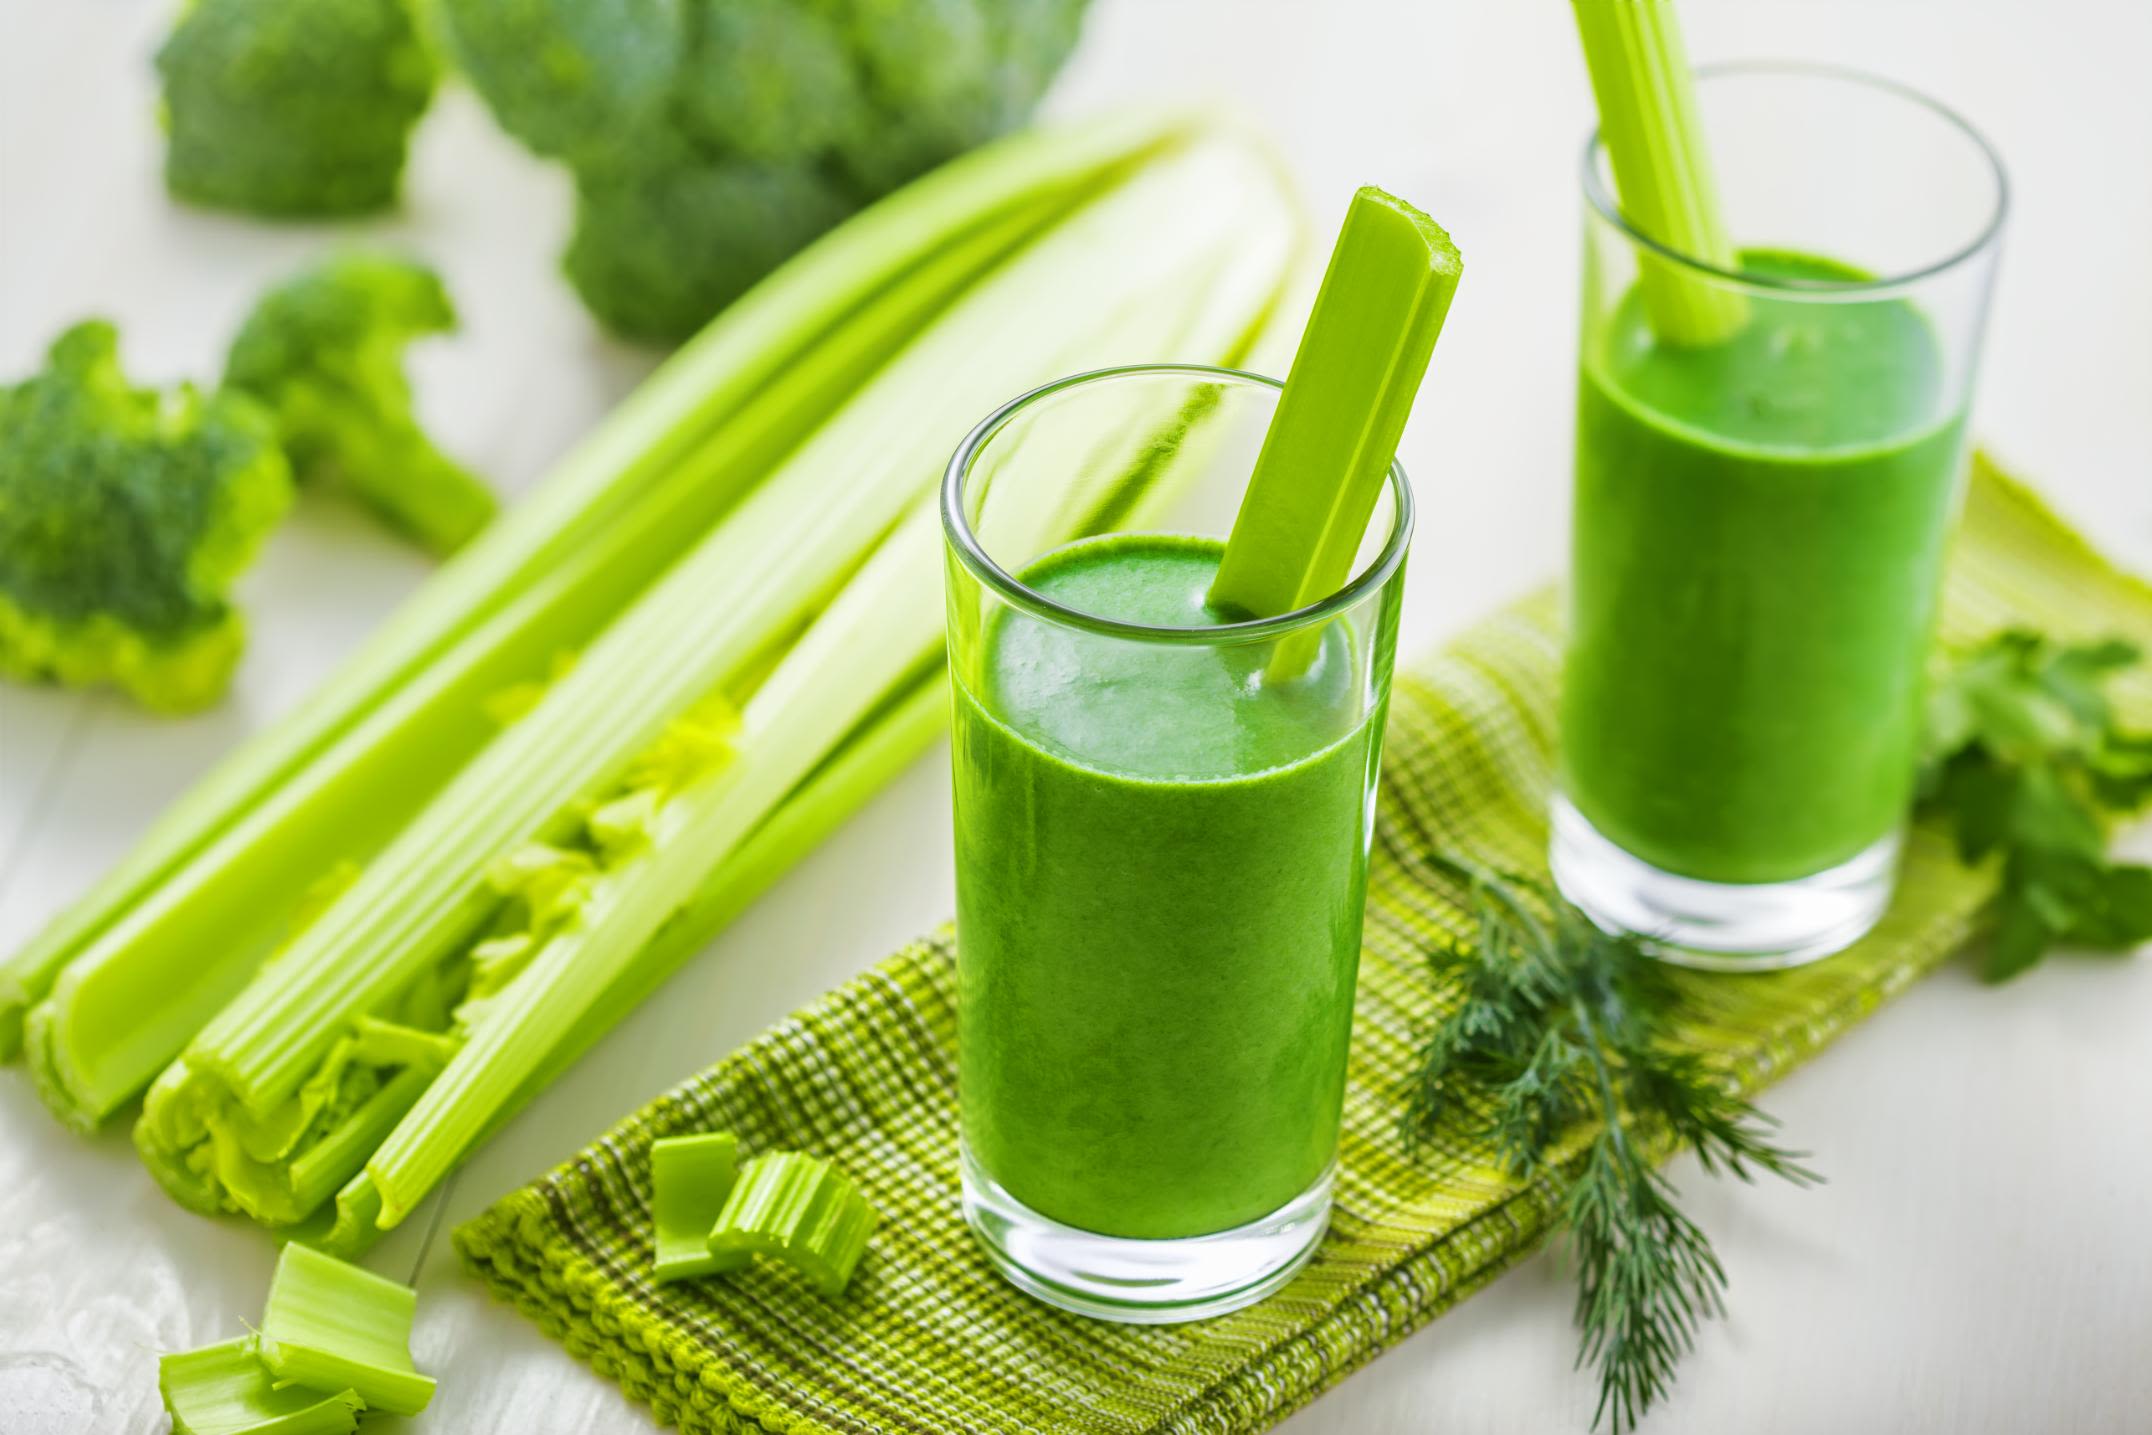 Benefits of Celery Juice: A Comprehensive Review Based on Scientific Research...